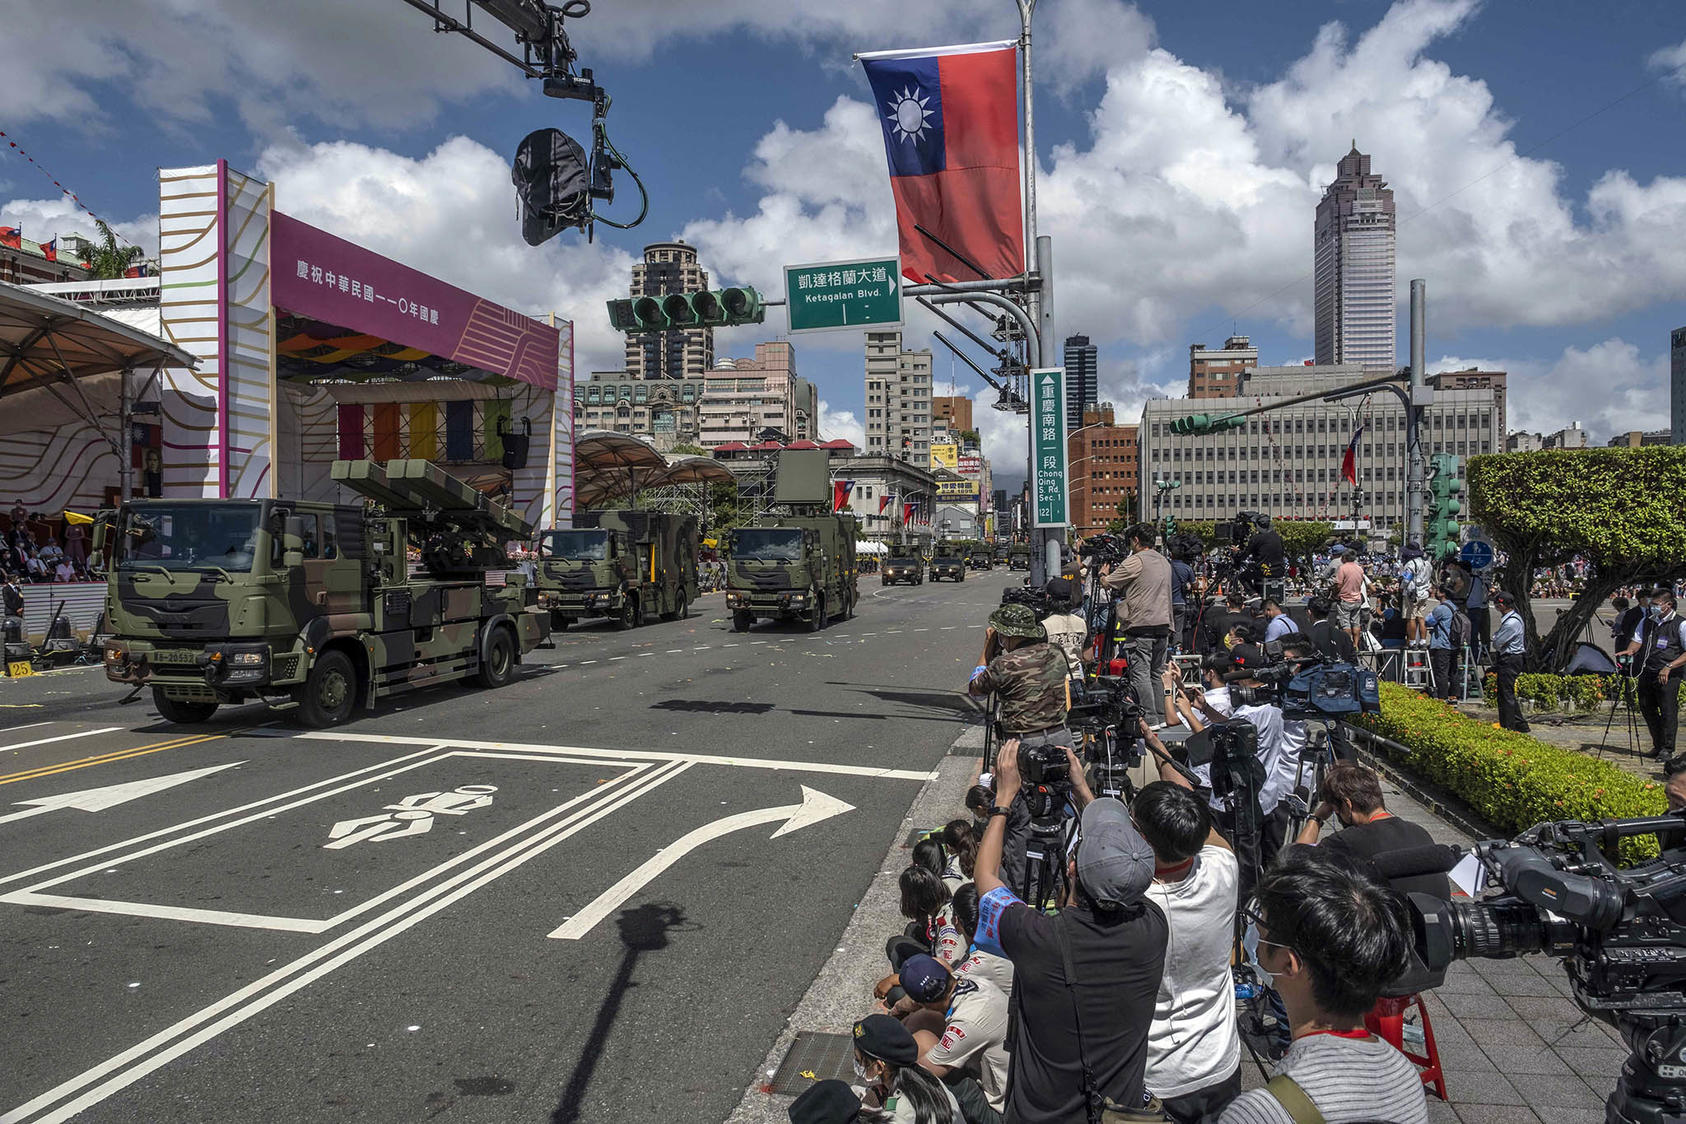 A military parade in Taipei for Taiwan’s national day celebration on Oct. 10, 2021. Amid a lack of crisis communication mechanisms, there are fears that U.S.-China tensions over Taiwan could erupt into conflict. (Lam Yik Fei/The New York Times)